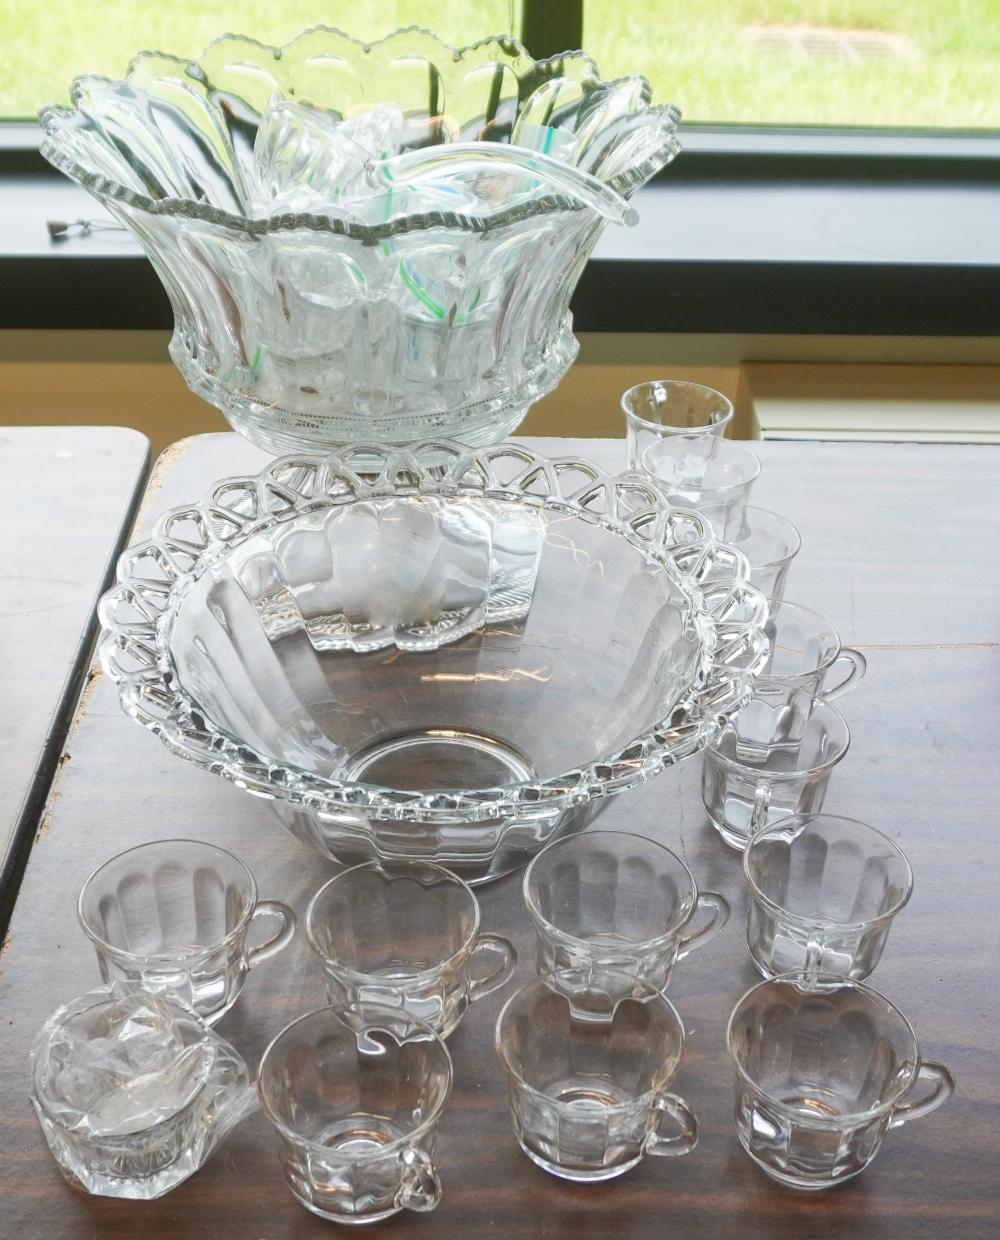 TWO GLASS PUNCH BOWLS STAND AND 2e78f8